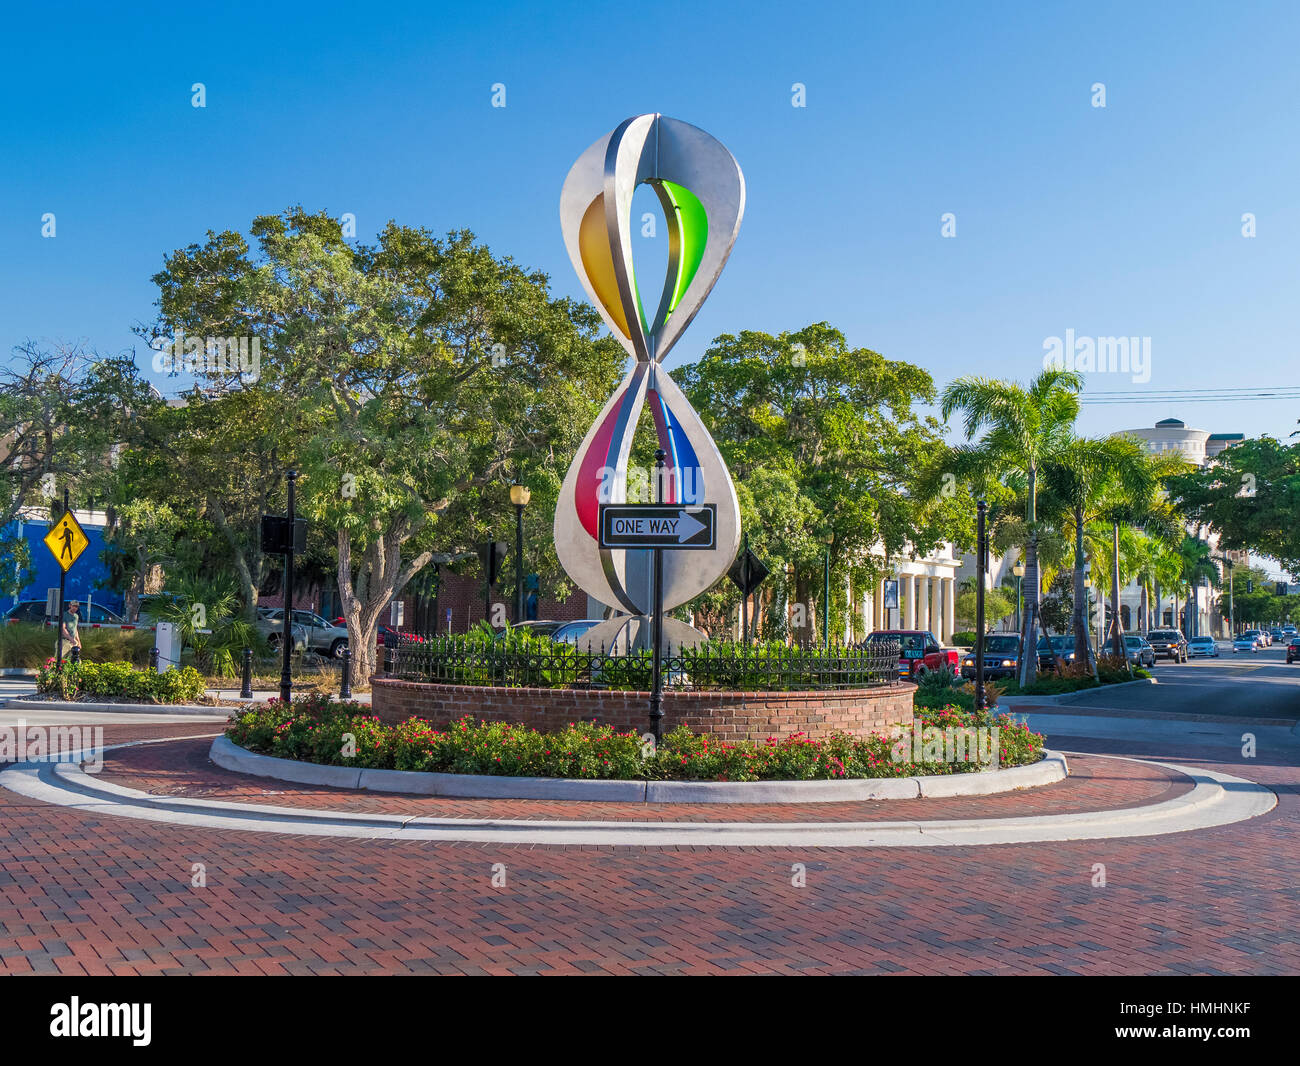 Art sculpture in center of roundabout on Main Street in downtown Sarasota Florida Stock Photo